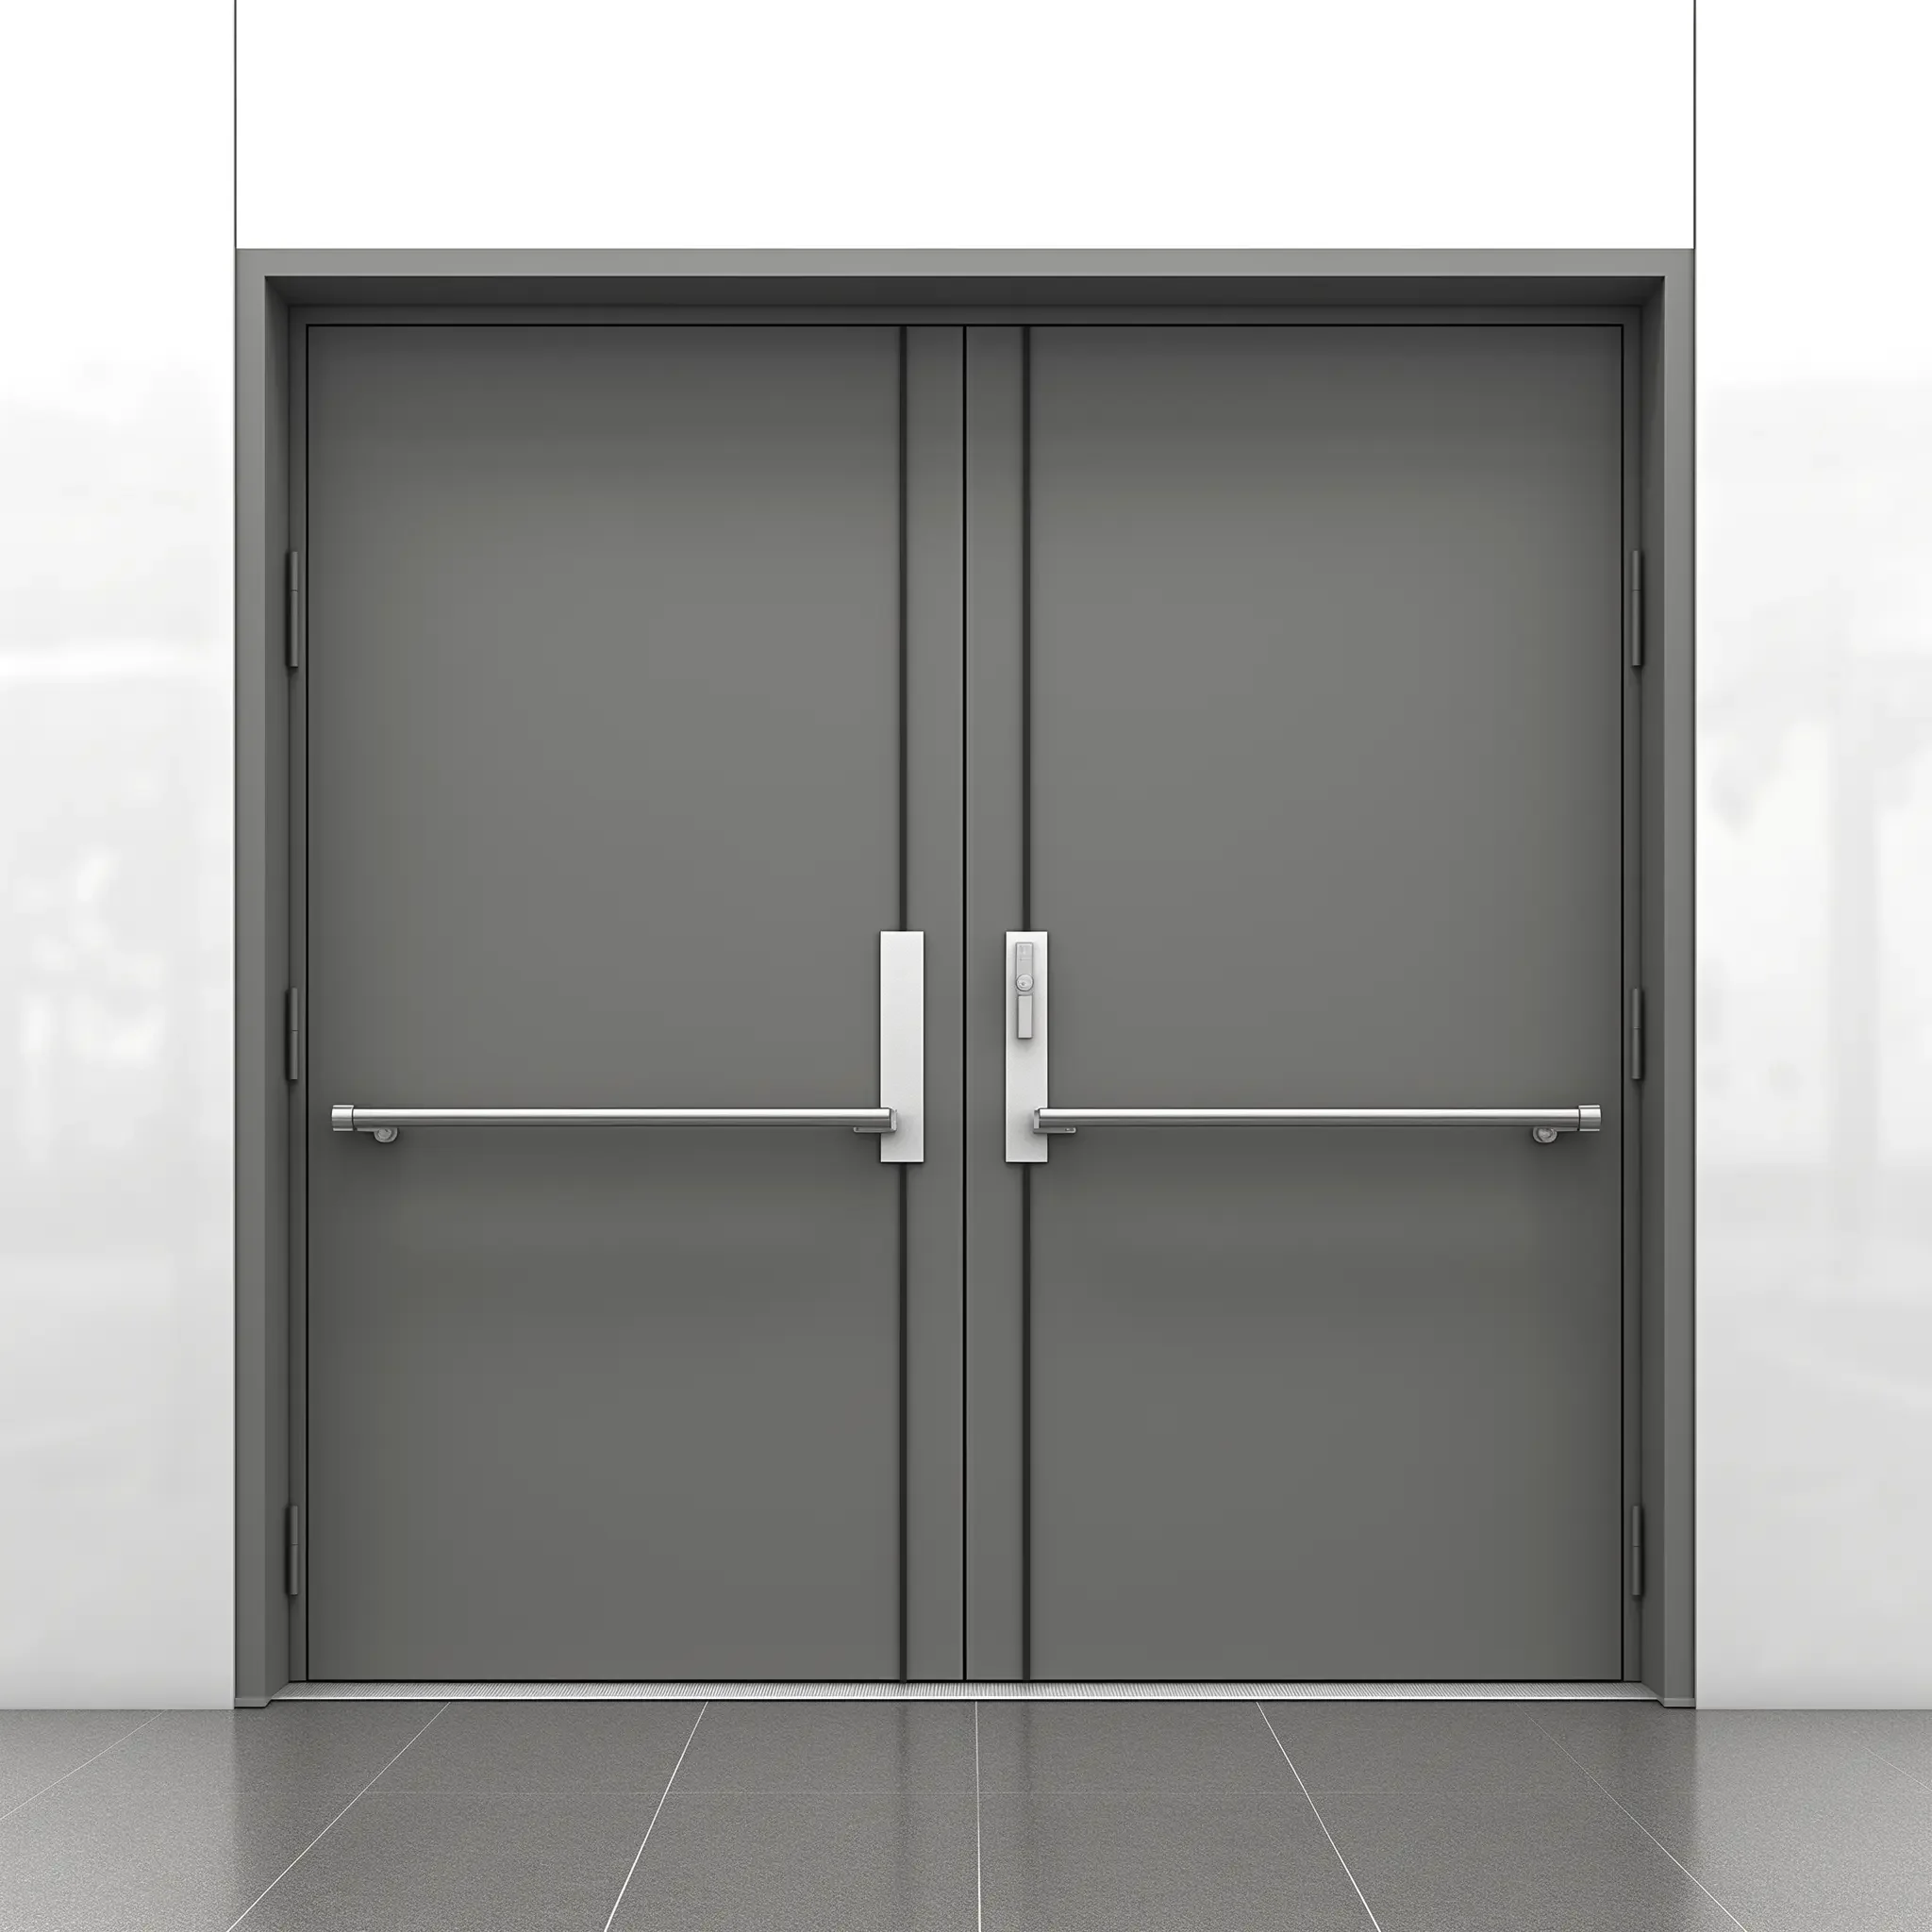 Commercial Fire rated double doors